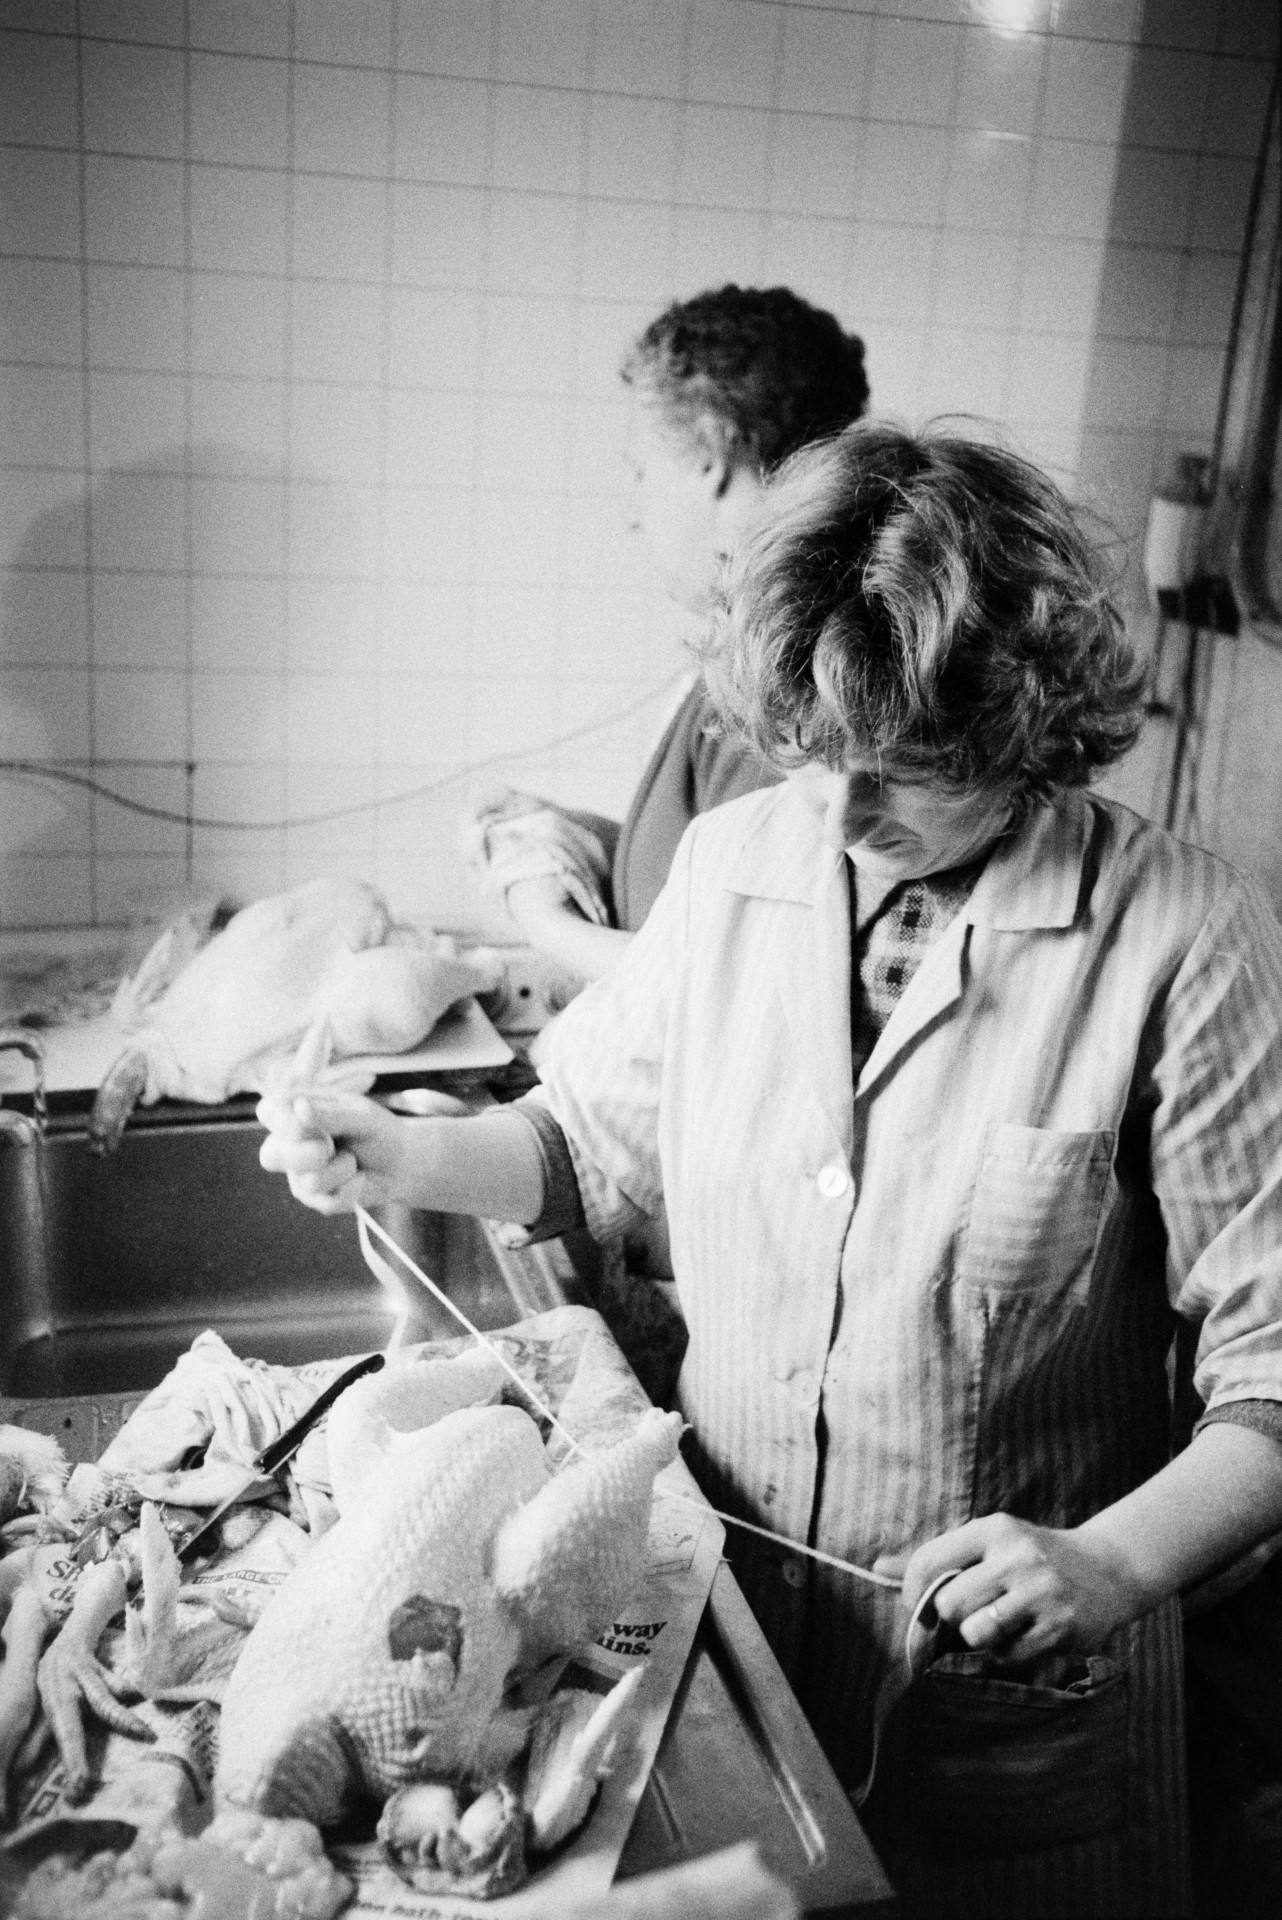 Marylin Bourne and another woman preparing Christmas chickens in the kitchen at Mill Road Farm, Beaford. The farm was also known as Jeffrys.